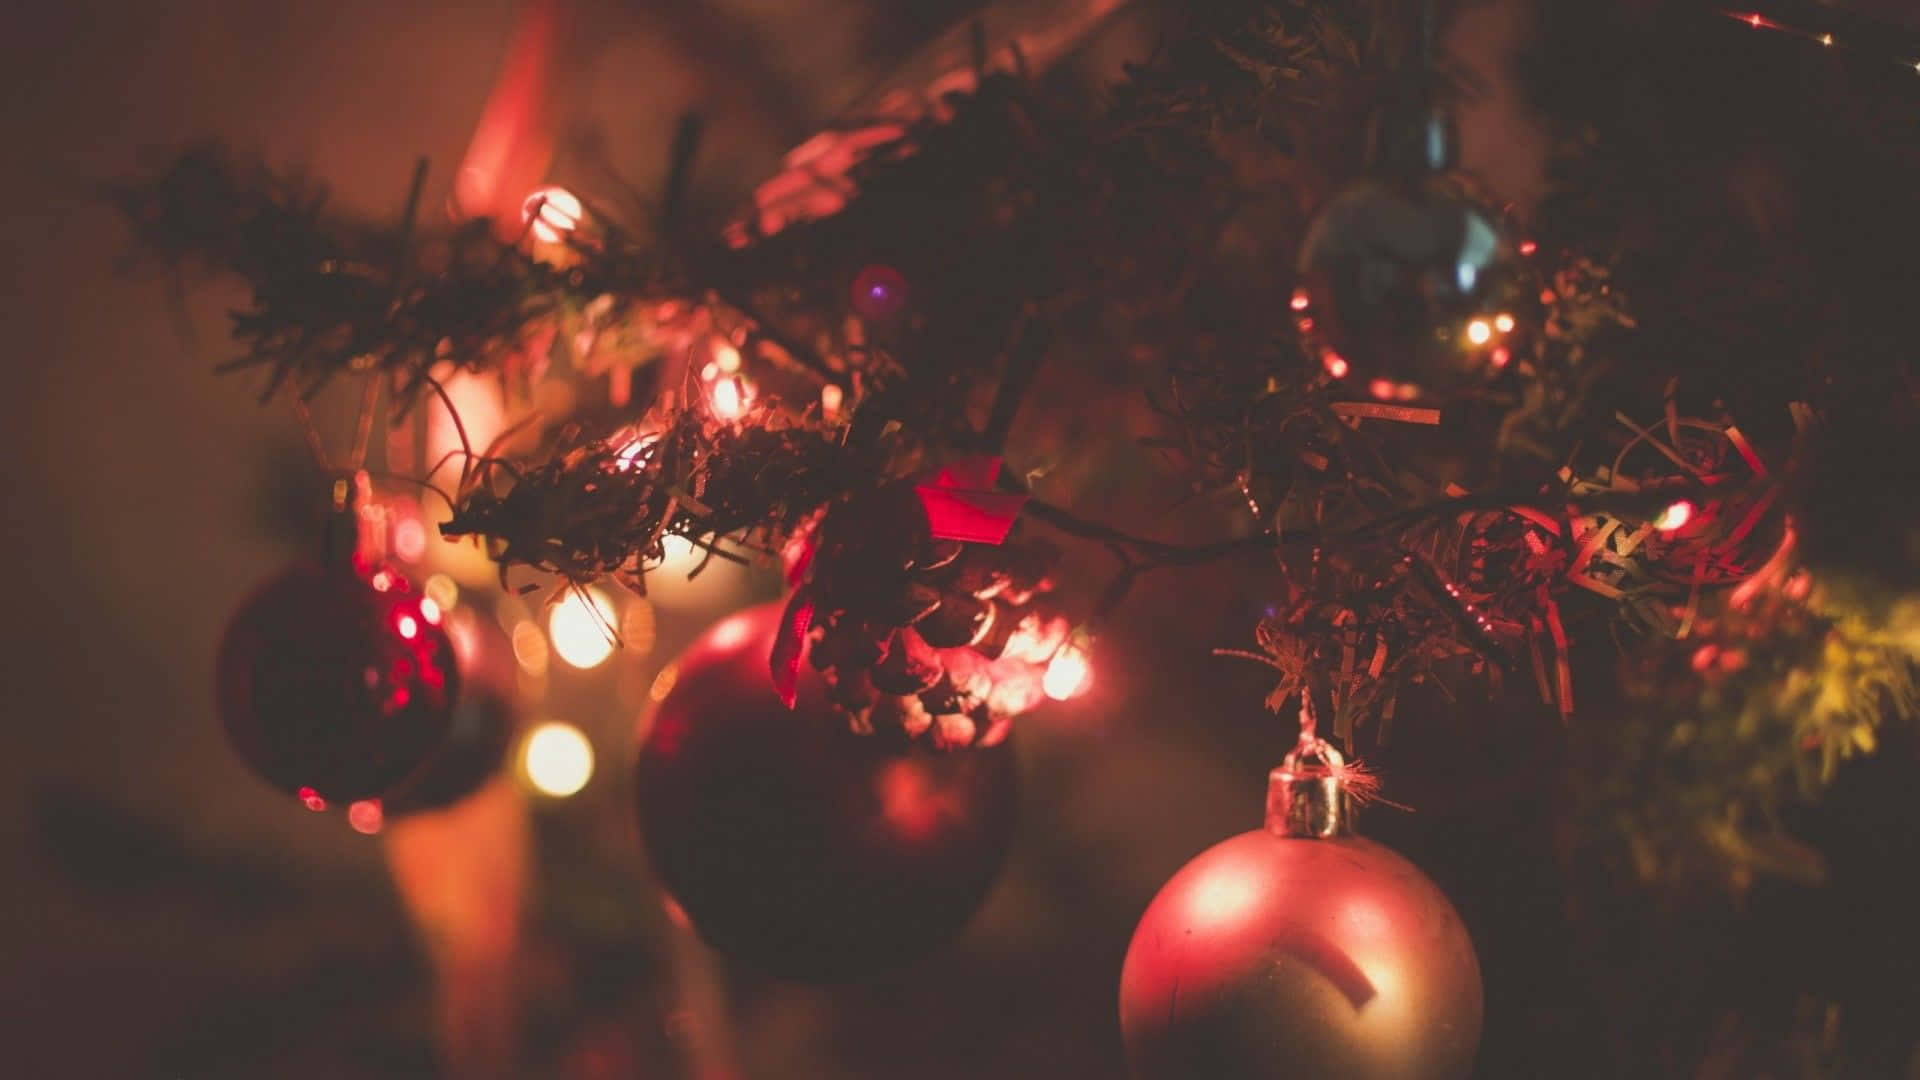 [100+] Aesthetic Christmas Laptop Wallpapers | Wallpapers.com